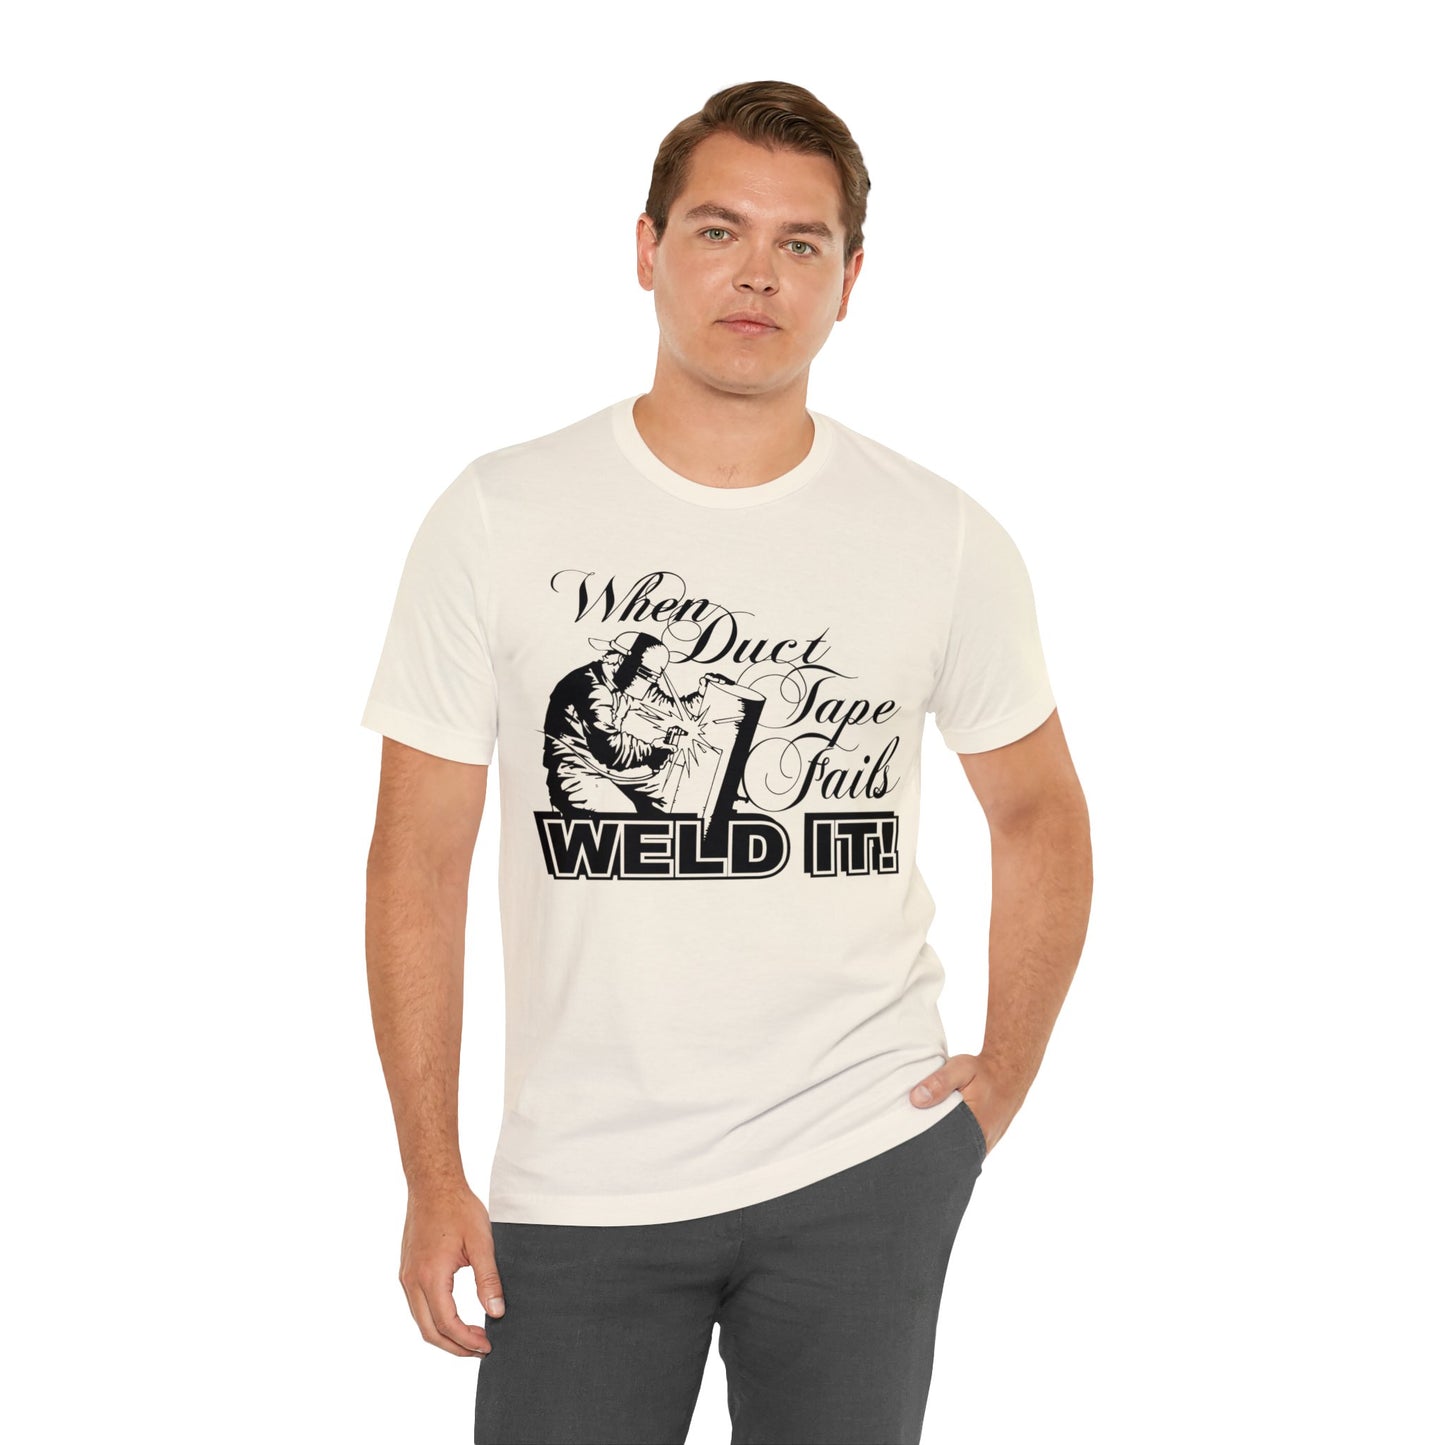 When Duct Tape Fails Weld IT T-Shirt – A Stylish Statement for Welding Enthusiasts